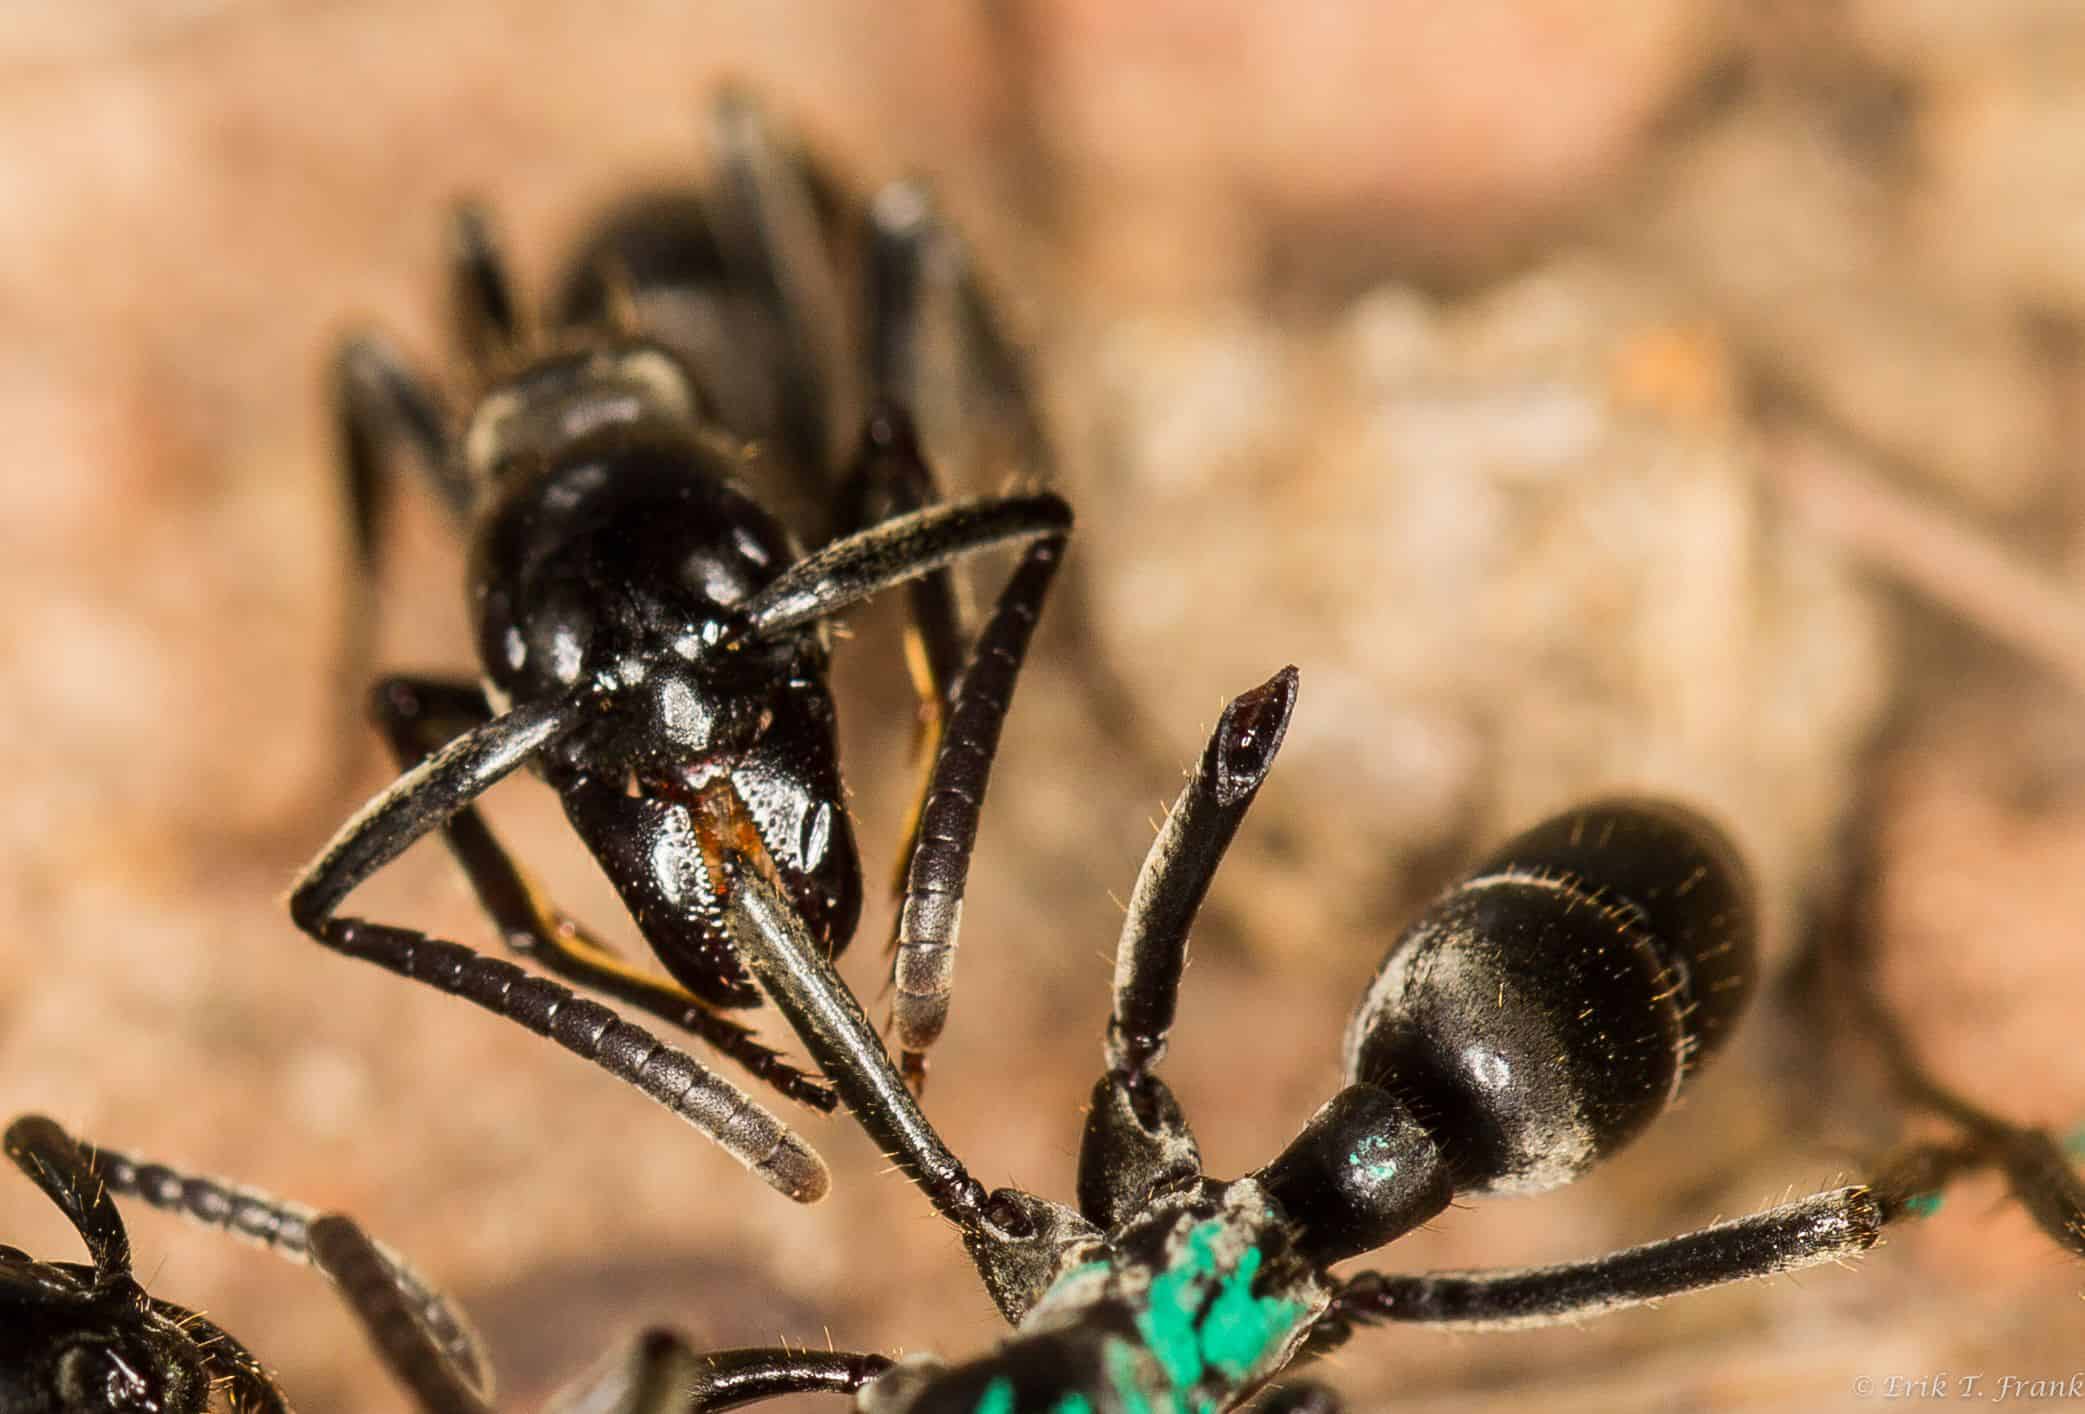 Ants As Pharmacists: These Ants Treat Infected Wounds With Antibiotics